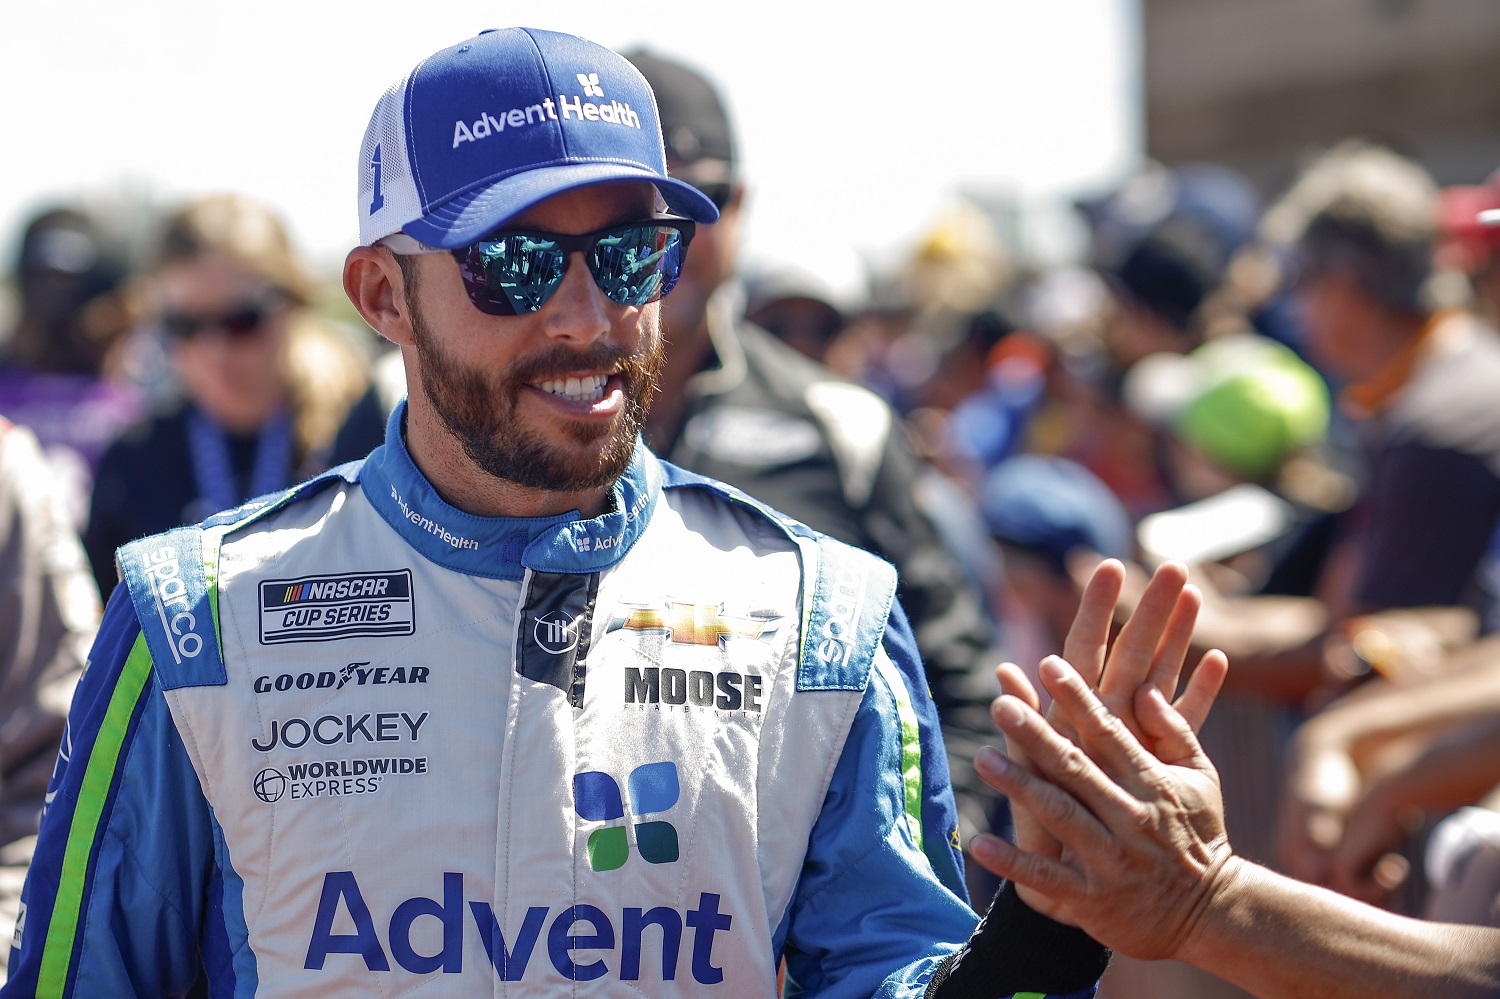 Ross Chastain greets NASCAR fans prior to the NASCAR Cup Series Hollywood Casino 400 at Kansas Speedway on Sept. 11, 2022. | Chris Graythen/Getty Images